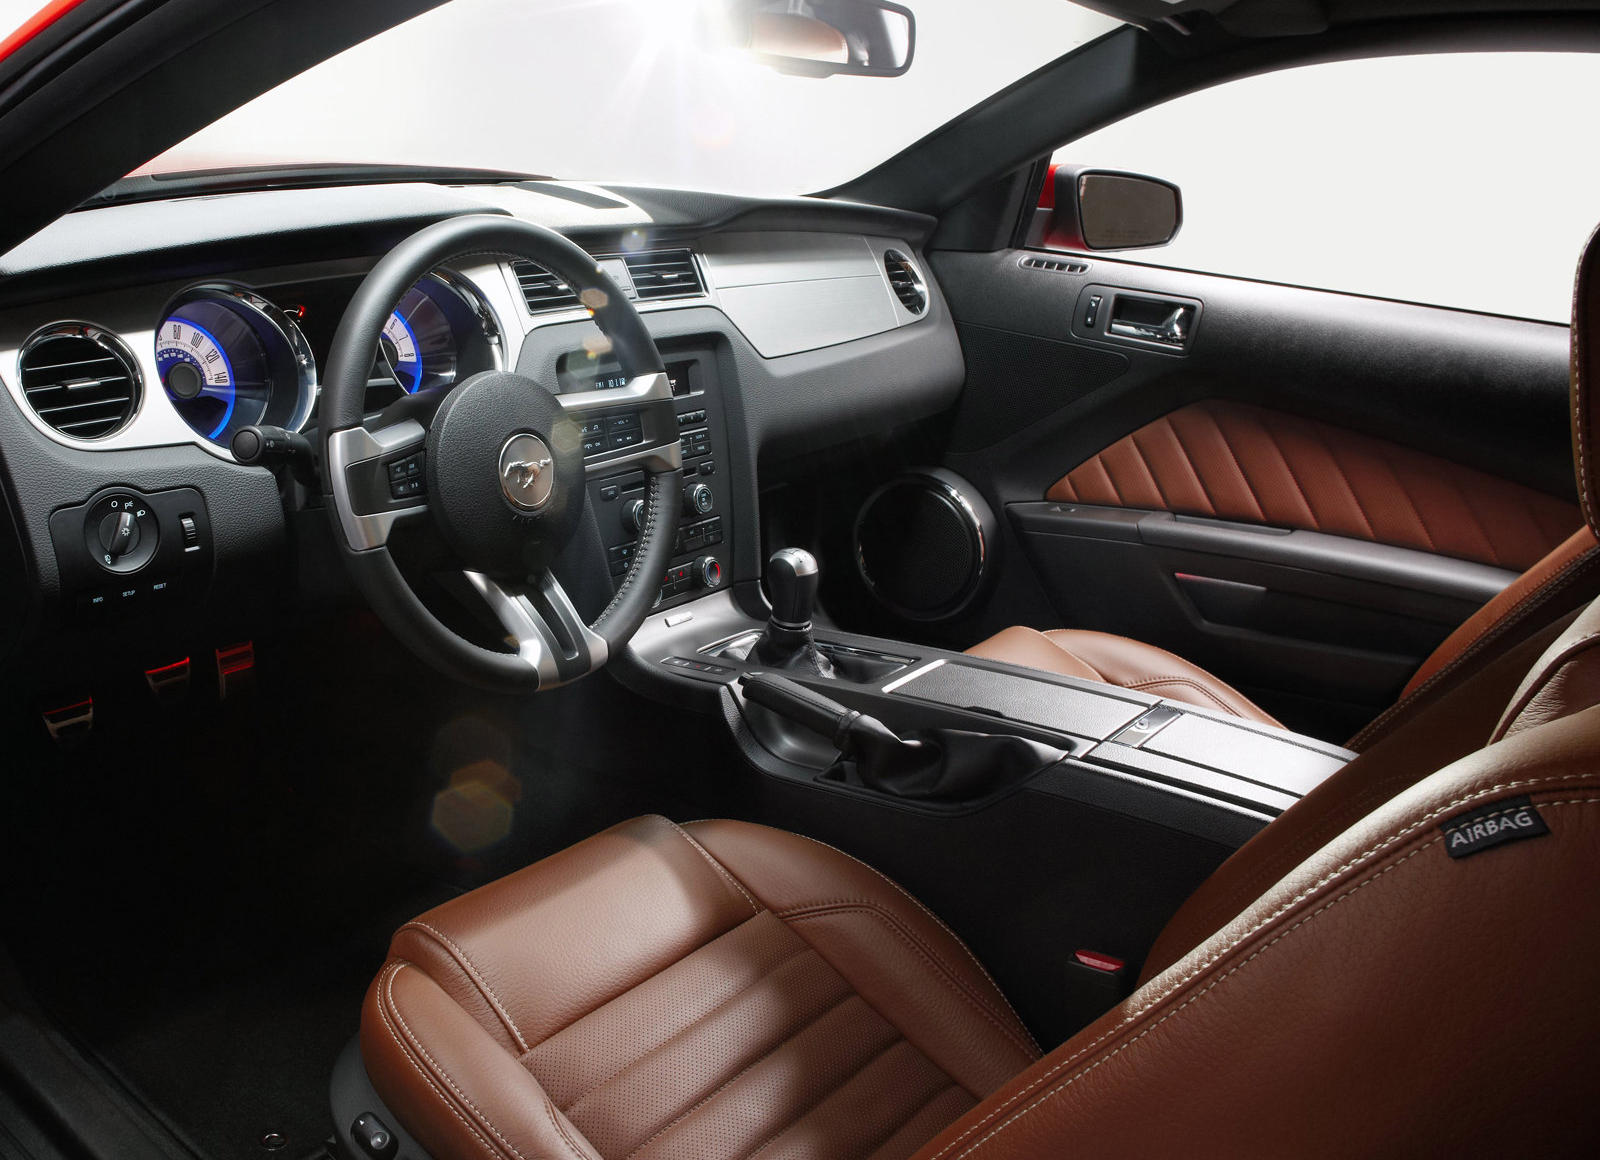 Clunky Snooze small 2012 Ford Mustang GT Coupe Interior Photos | CarBuzz